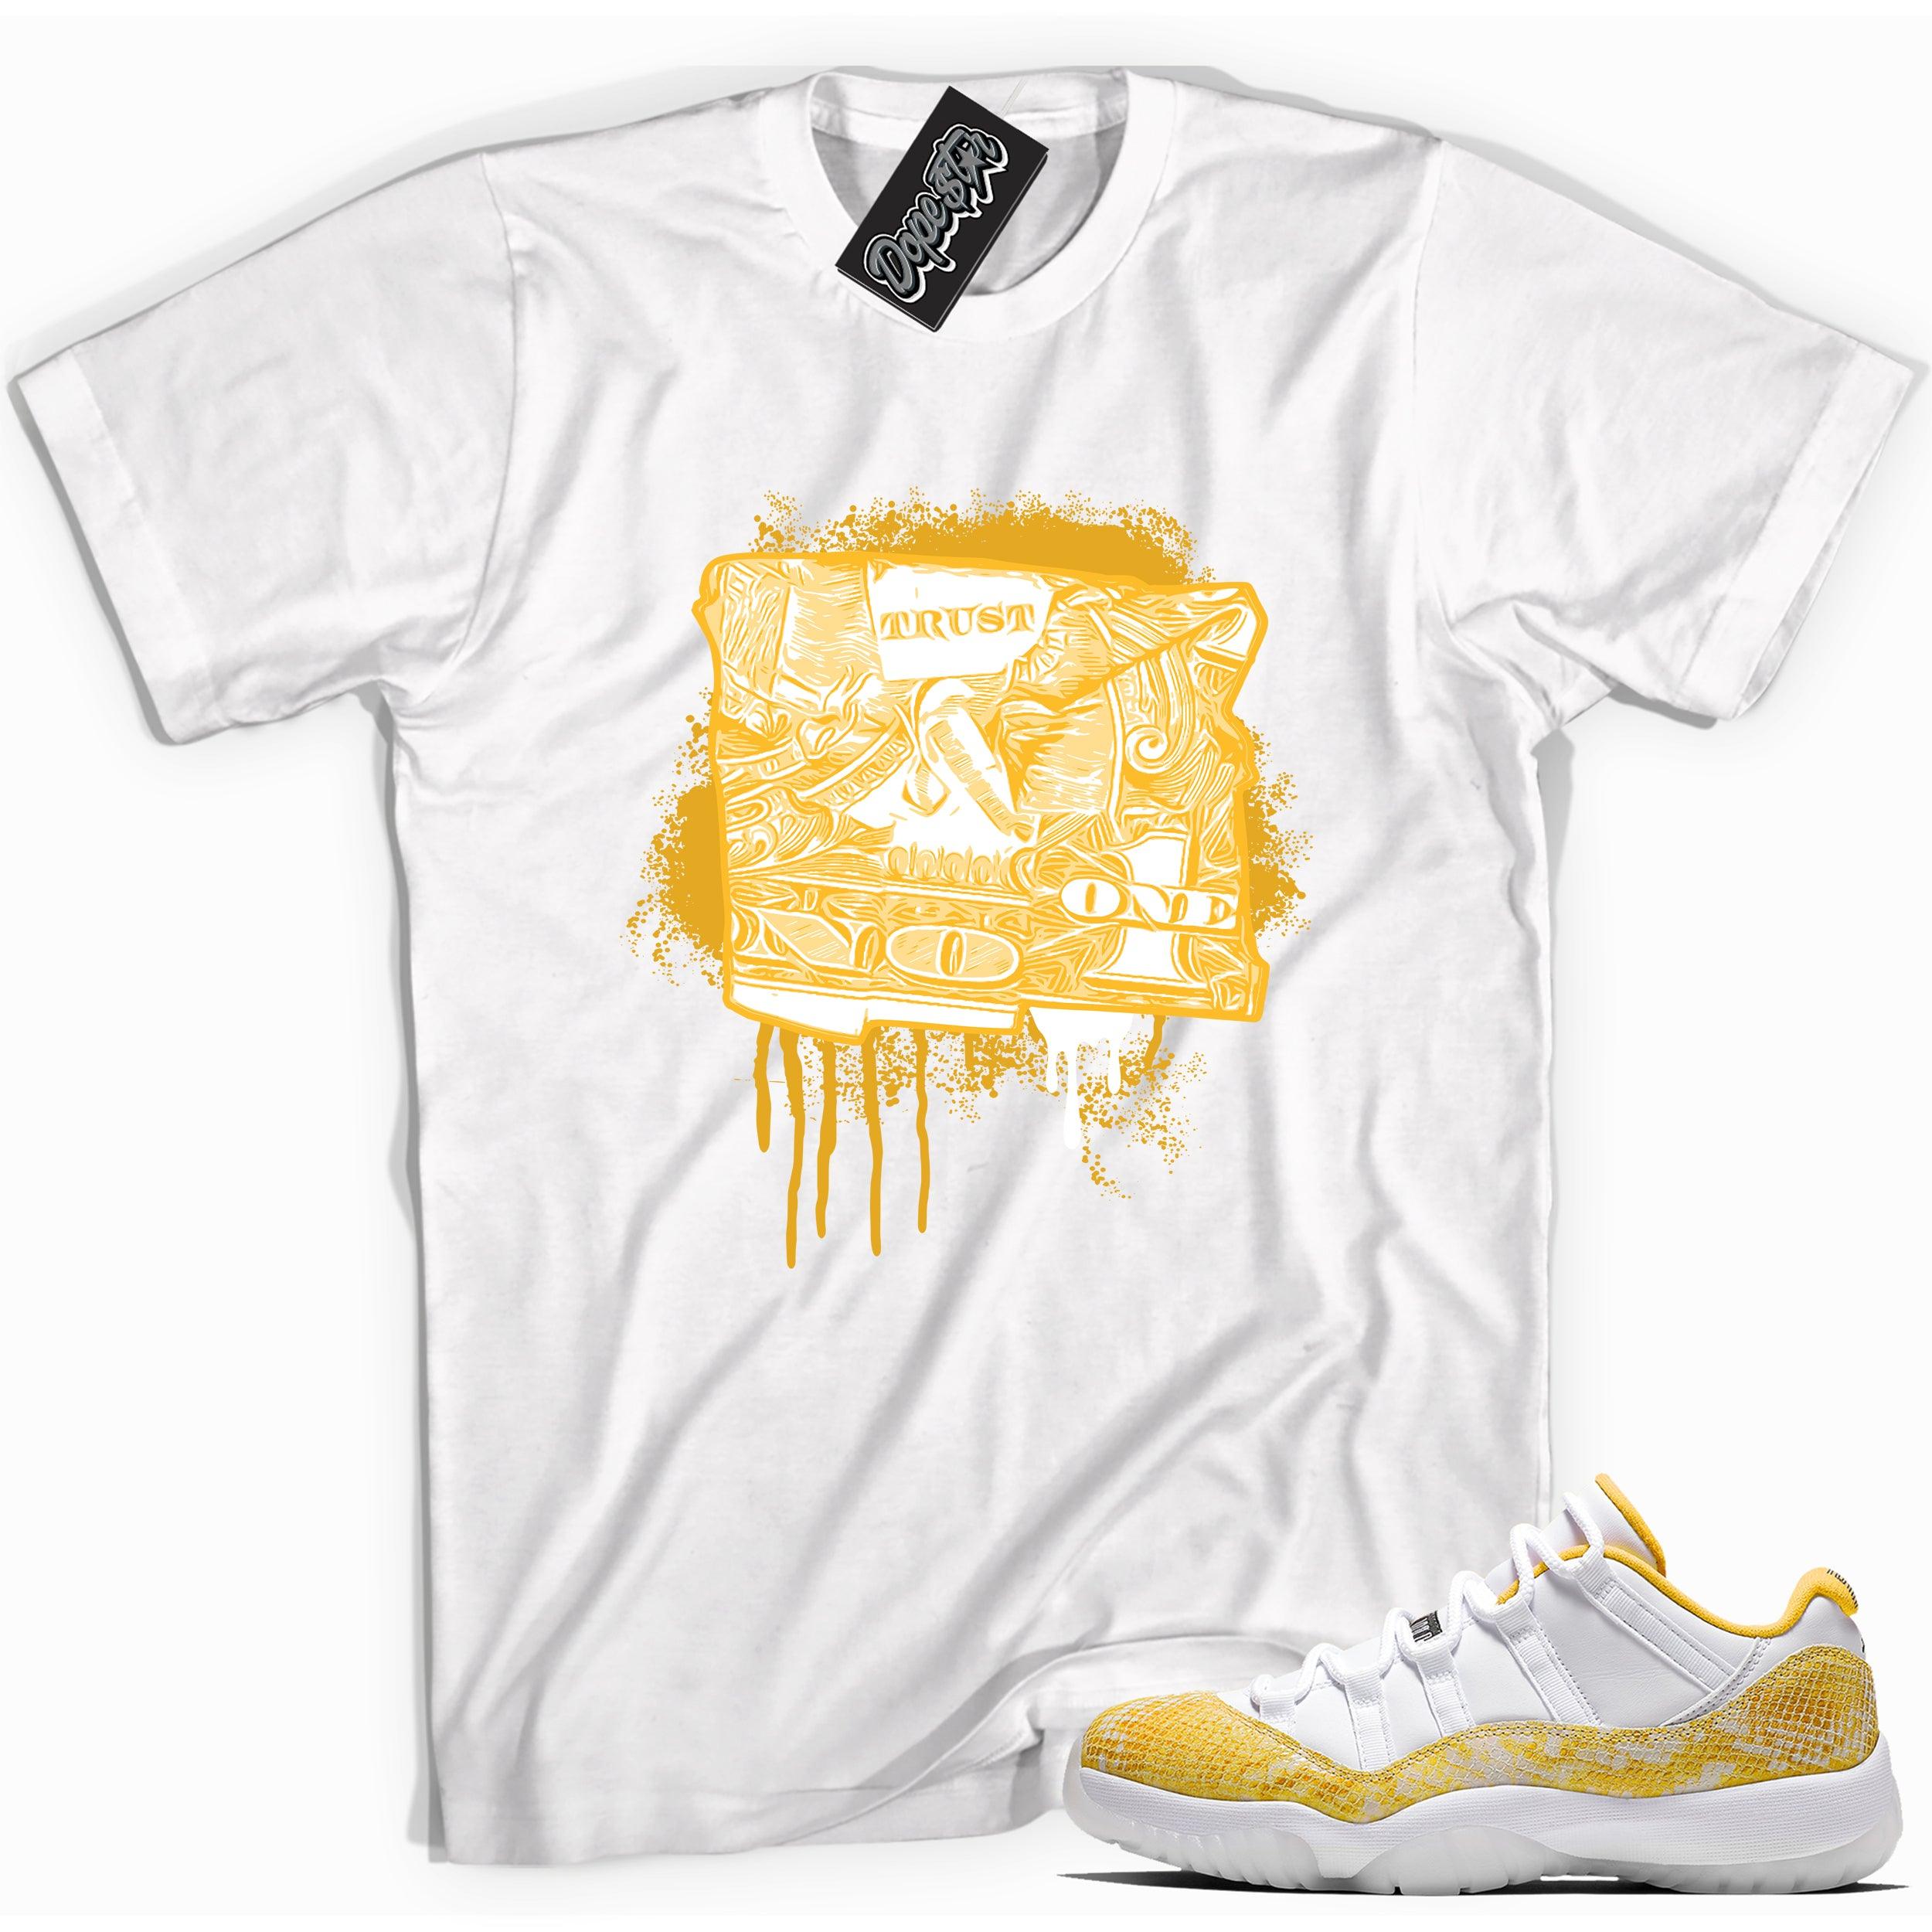 Cool white graphic tee with 'trust no one dollar bill' print, that perfectly matches Air Jordan 11 Retro Low Yellow Snakeskin sneakers